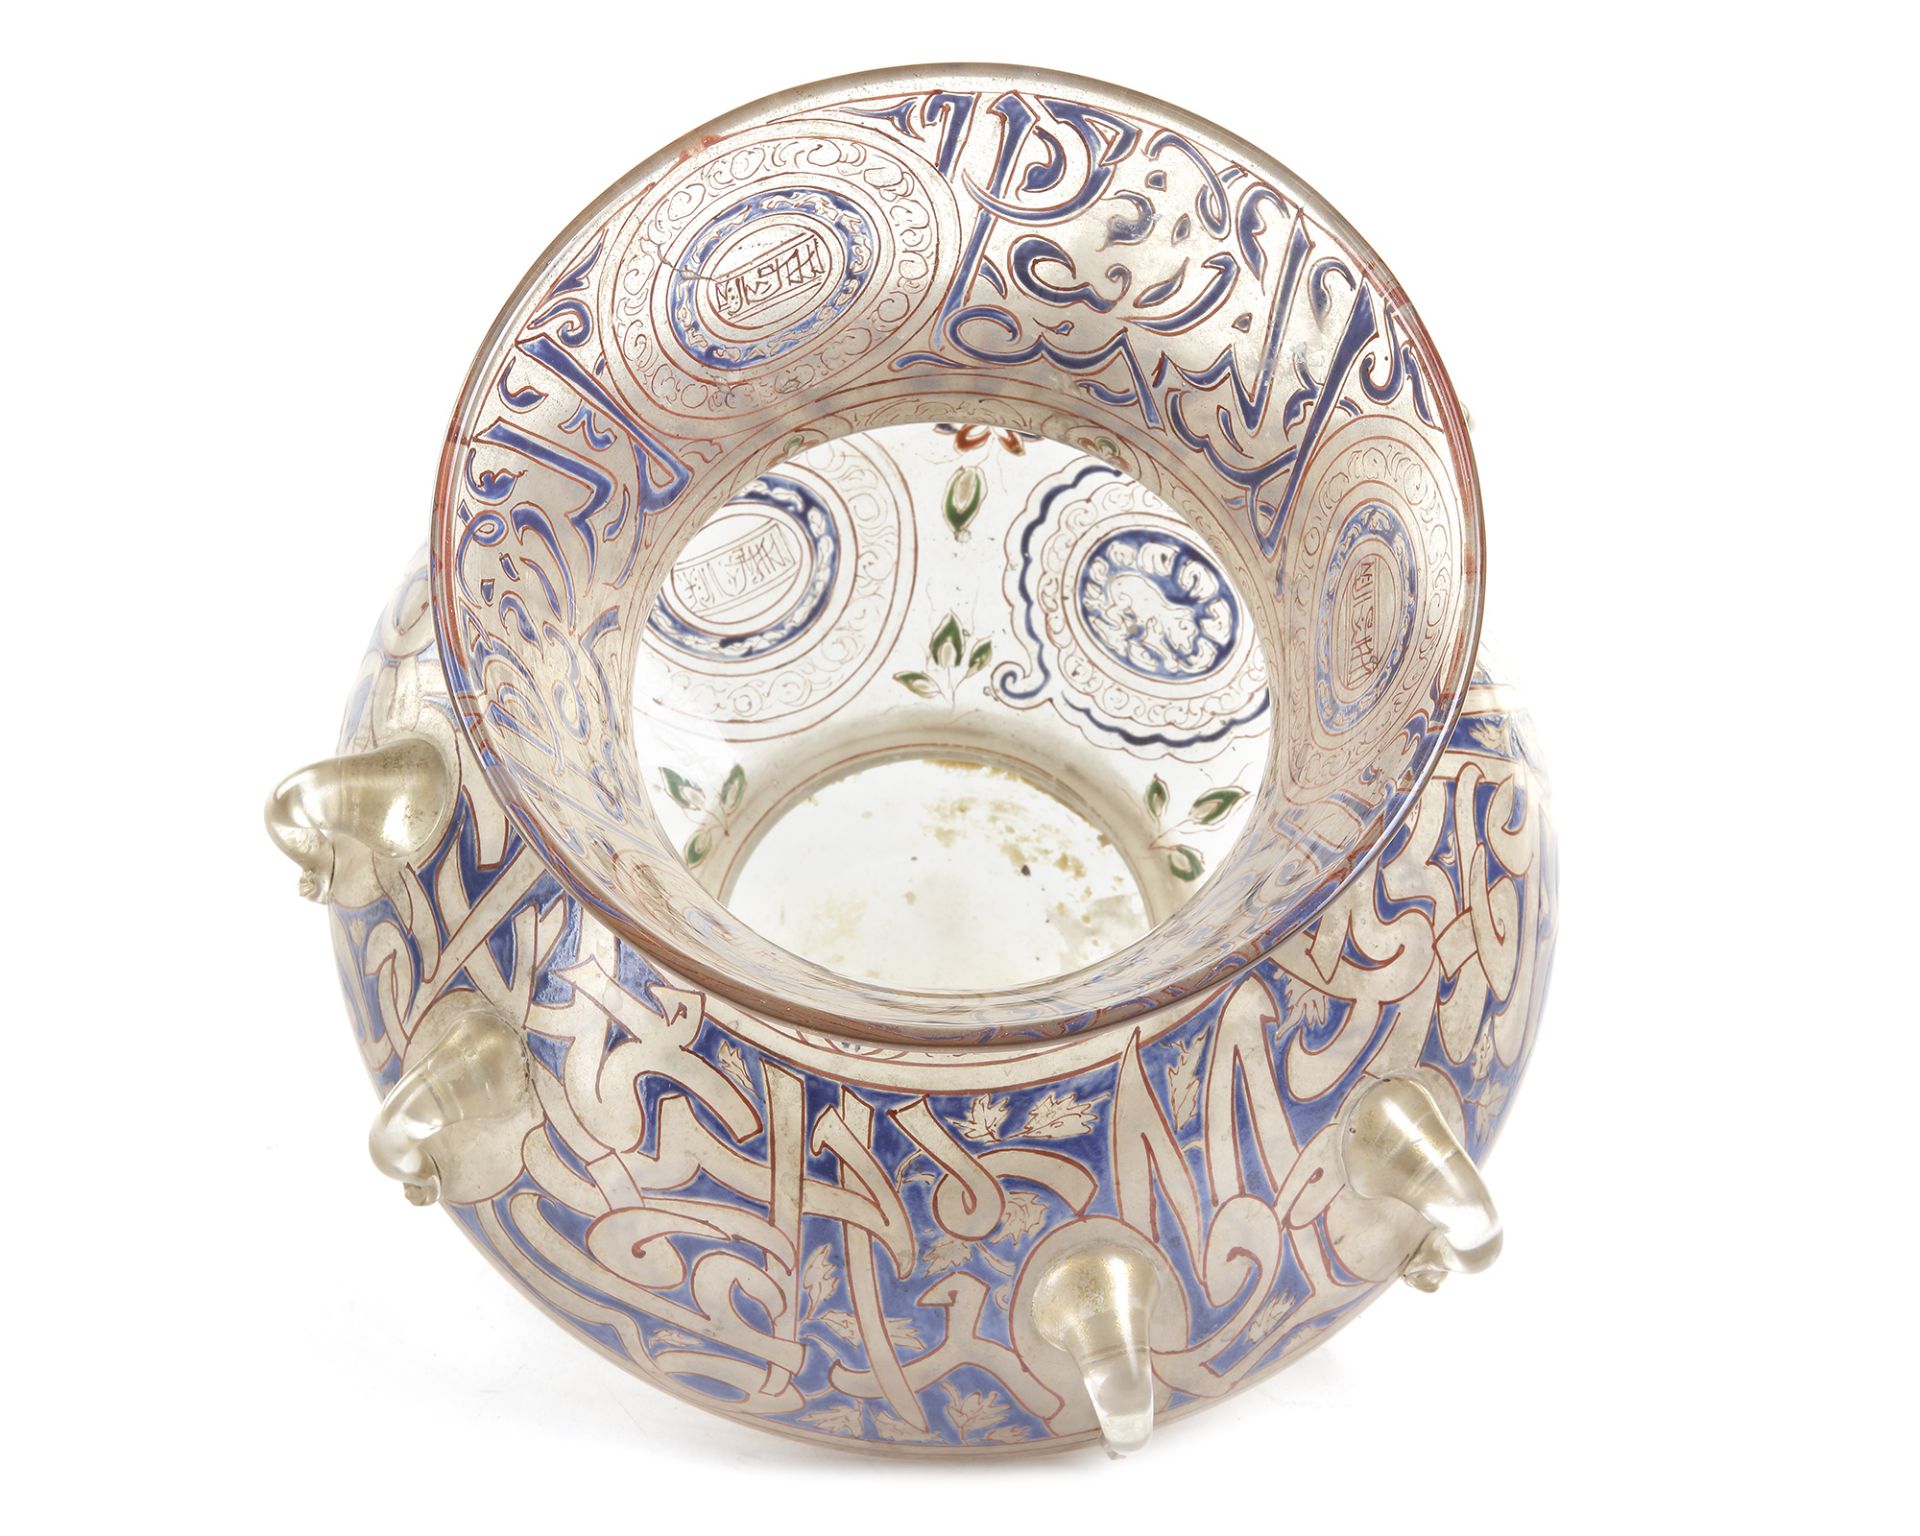 A MAMLUK-STYLE ENAMELLED CLEAR GLASS MOSQUE LAMP POSSIBLY BROCARD, FRANCE, SECOND HALF 19TH CENTURY - Image 6 of 10